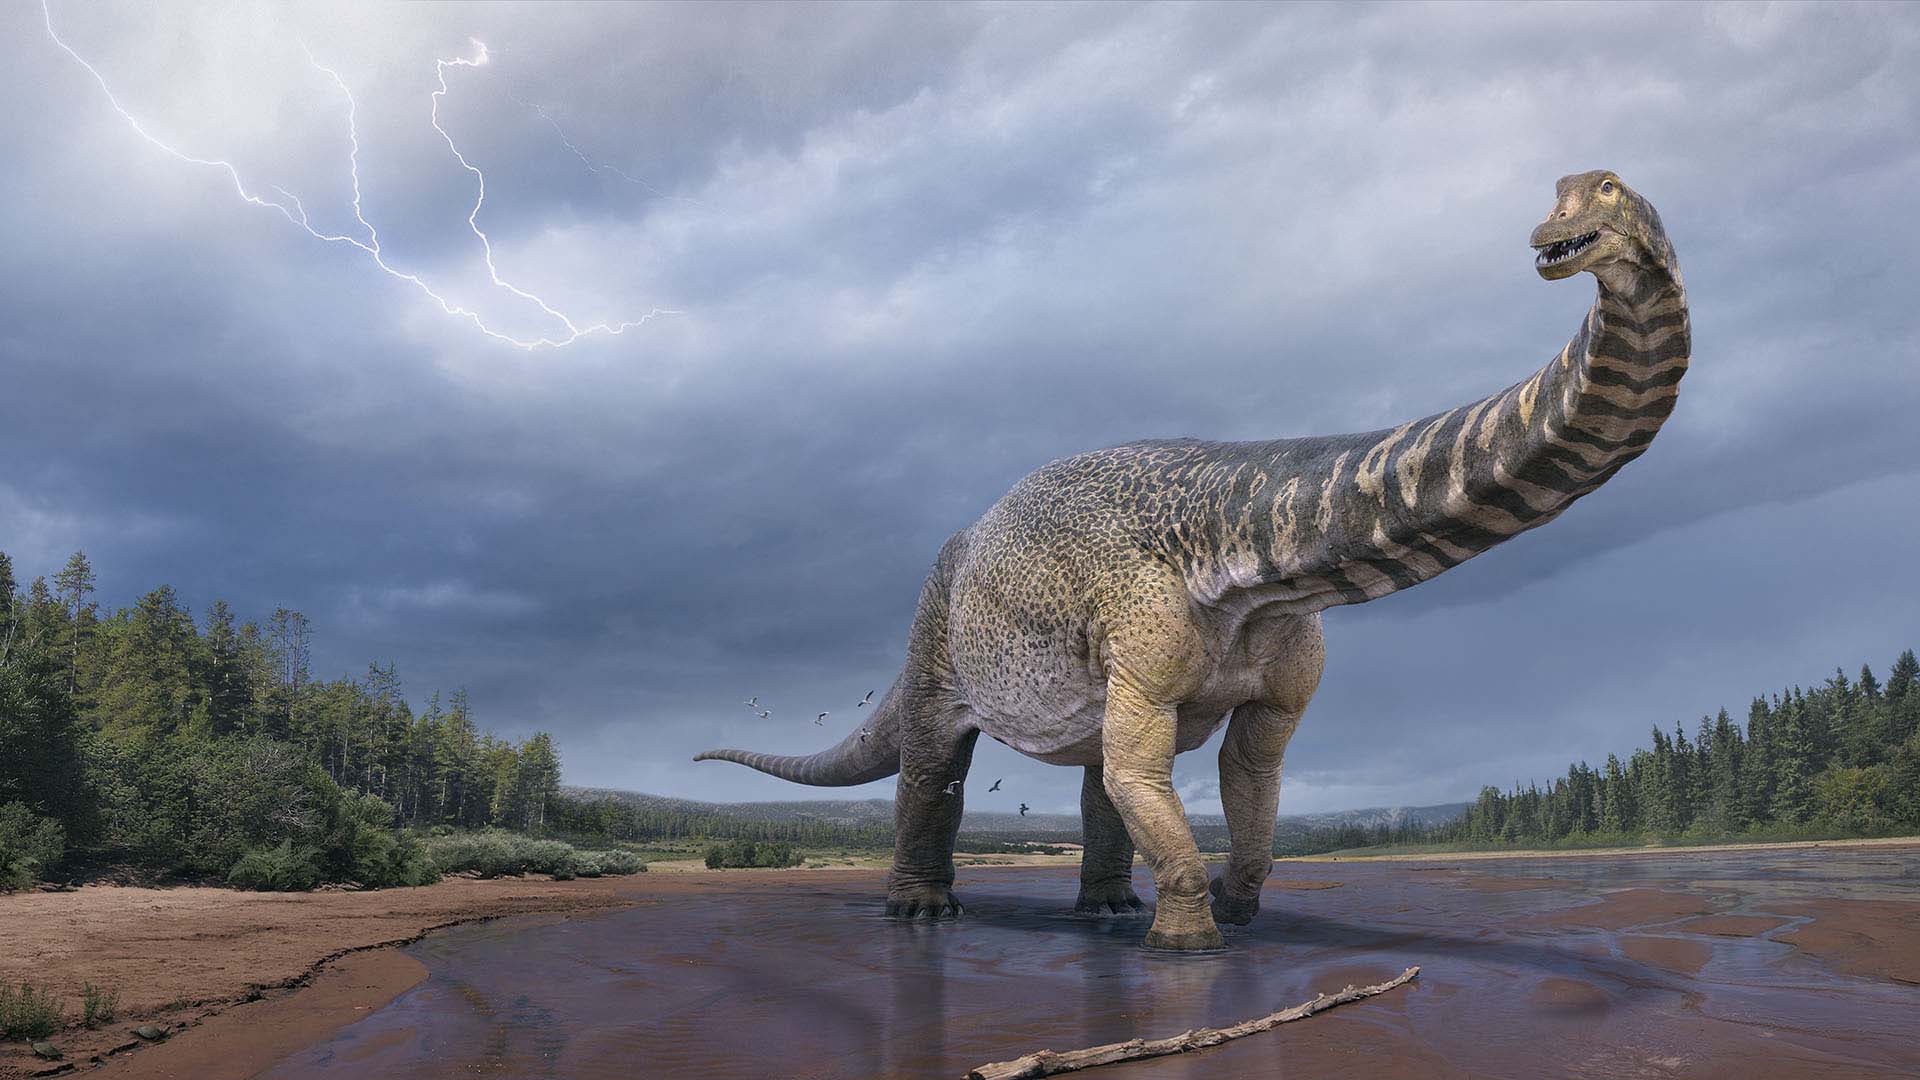 This 30-Metre-Long Dinosaur Found in Outback Queensland Is Officially Australia's Largest Ever